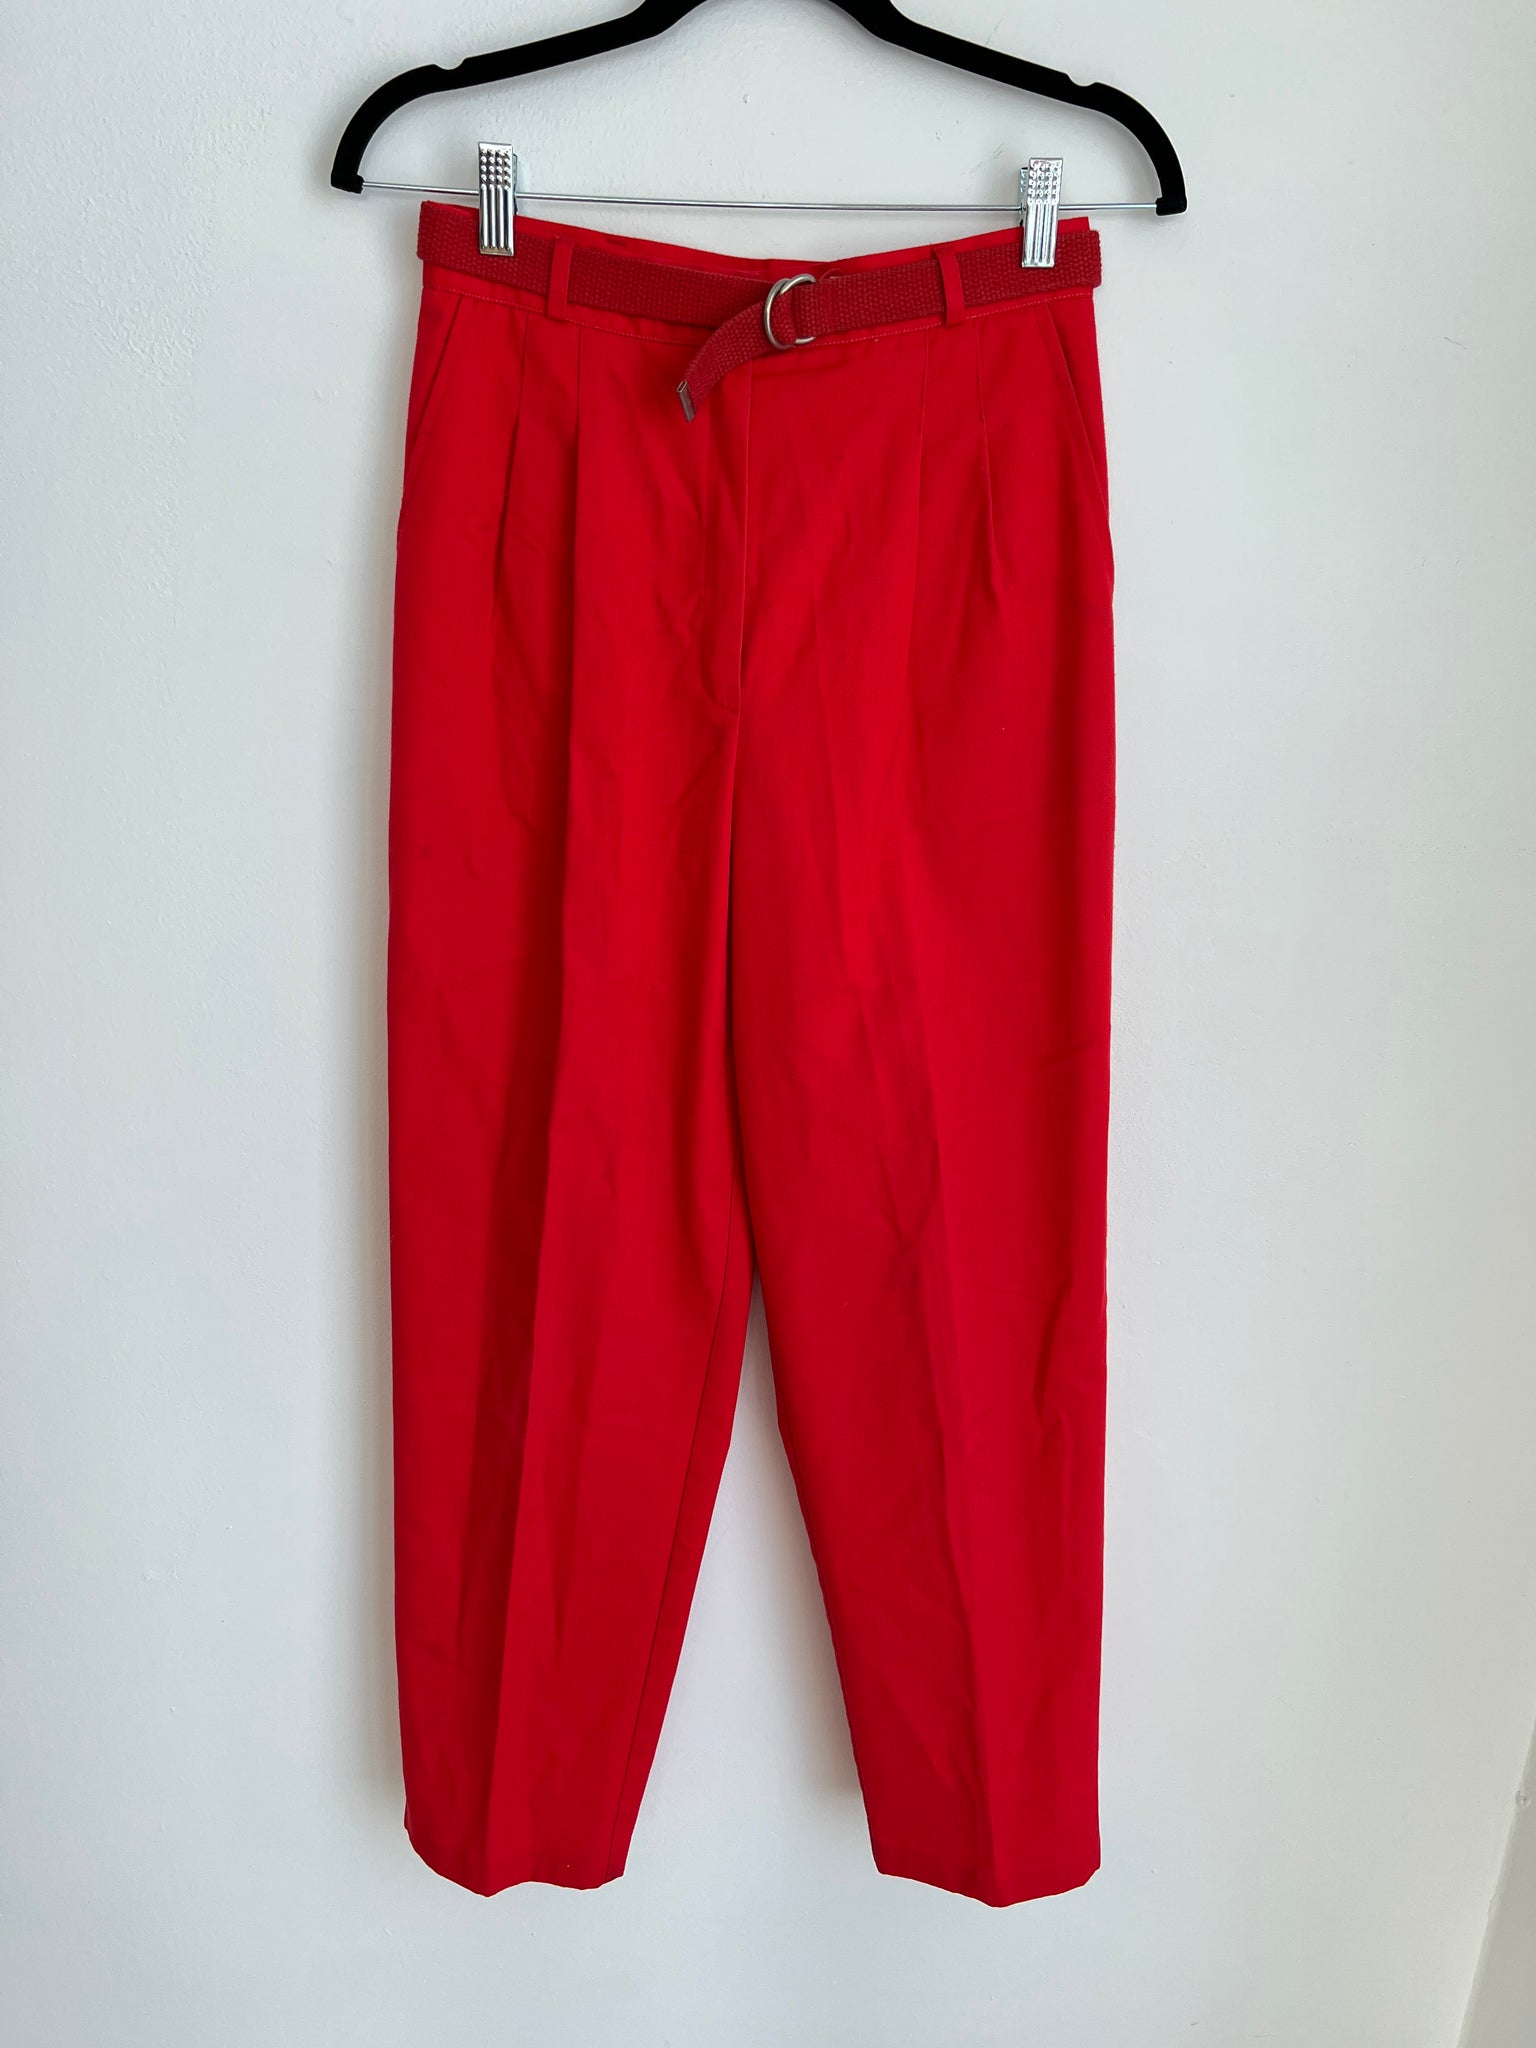 1980s PANTS- Counterparts red pleated w/ belt